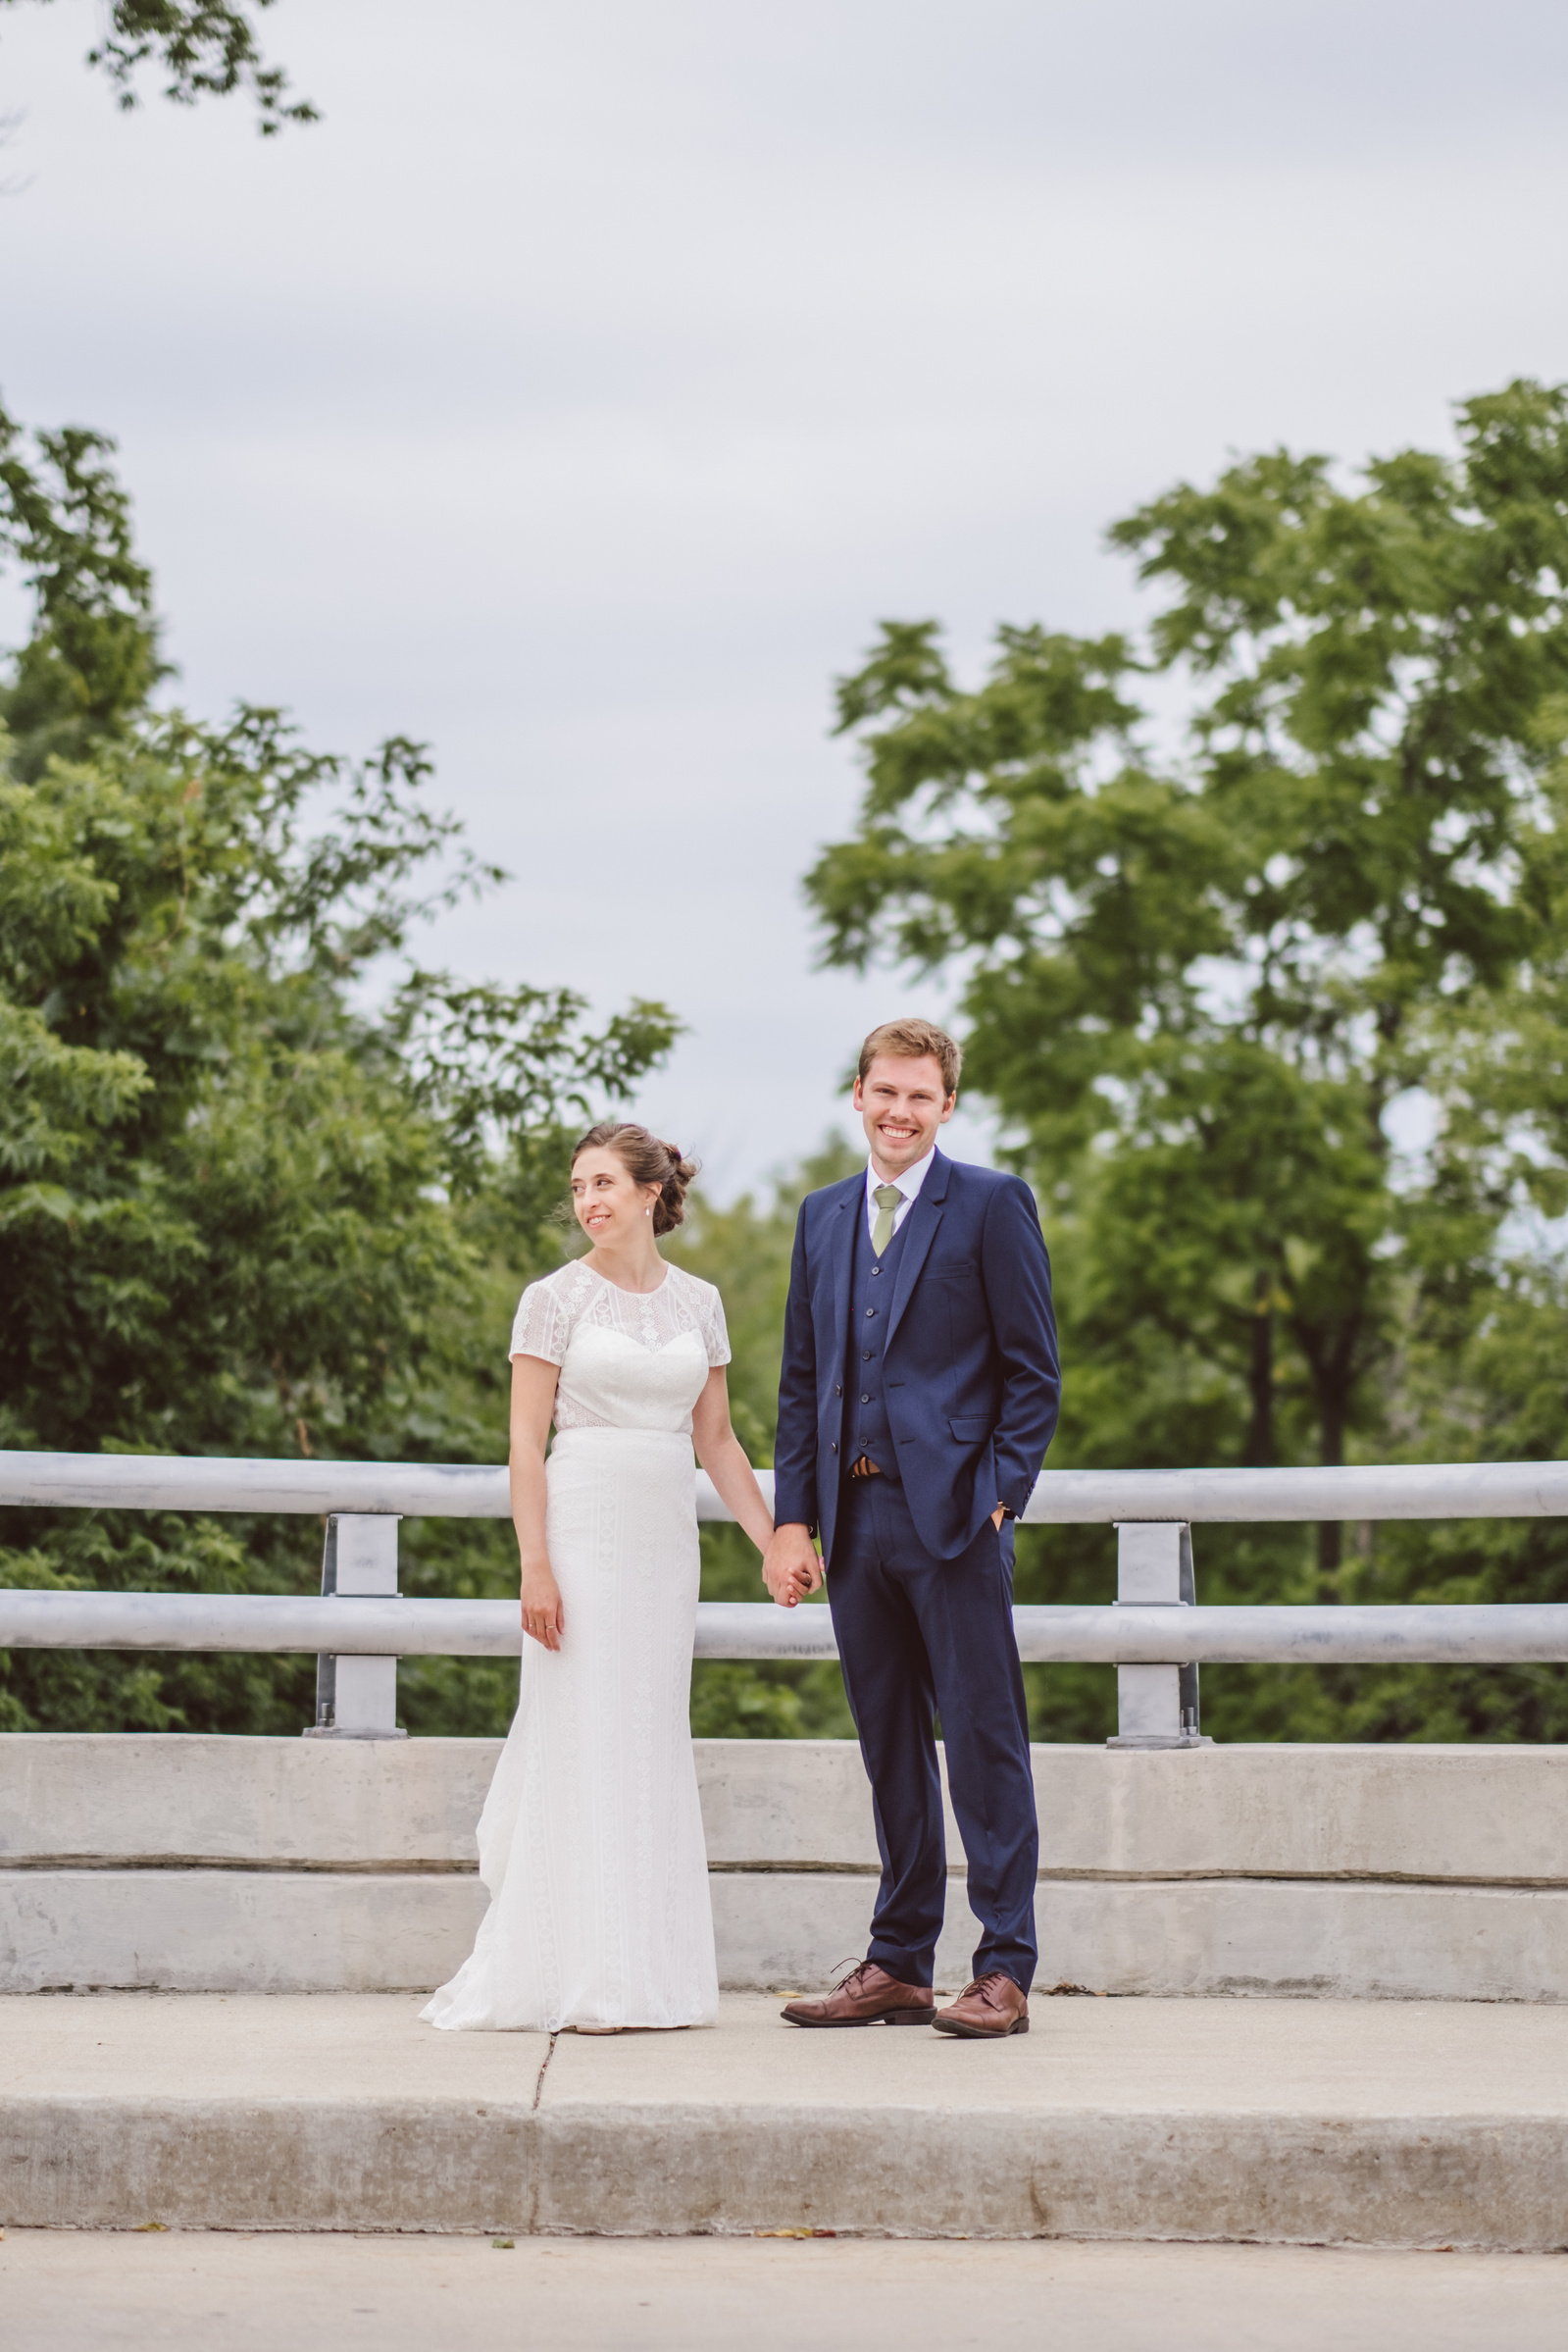 Couple hold hands on their wedding day in Milwaukee, WI at The Urban Ecology Center.  Portrait orientation, groom in blue suit, bride in white dress stand on a bridge.